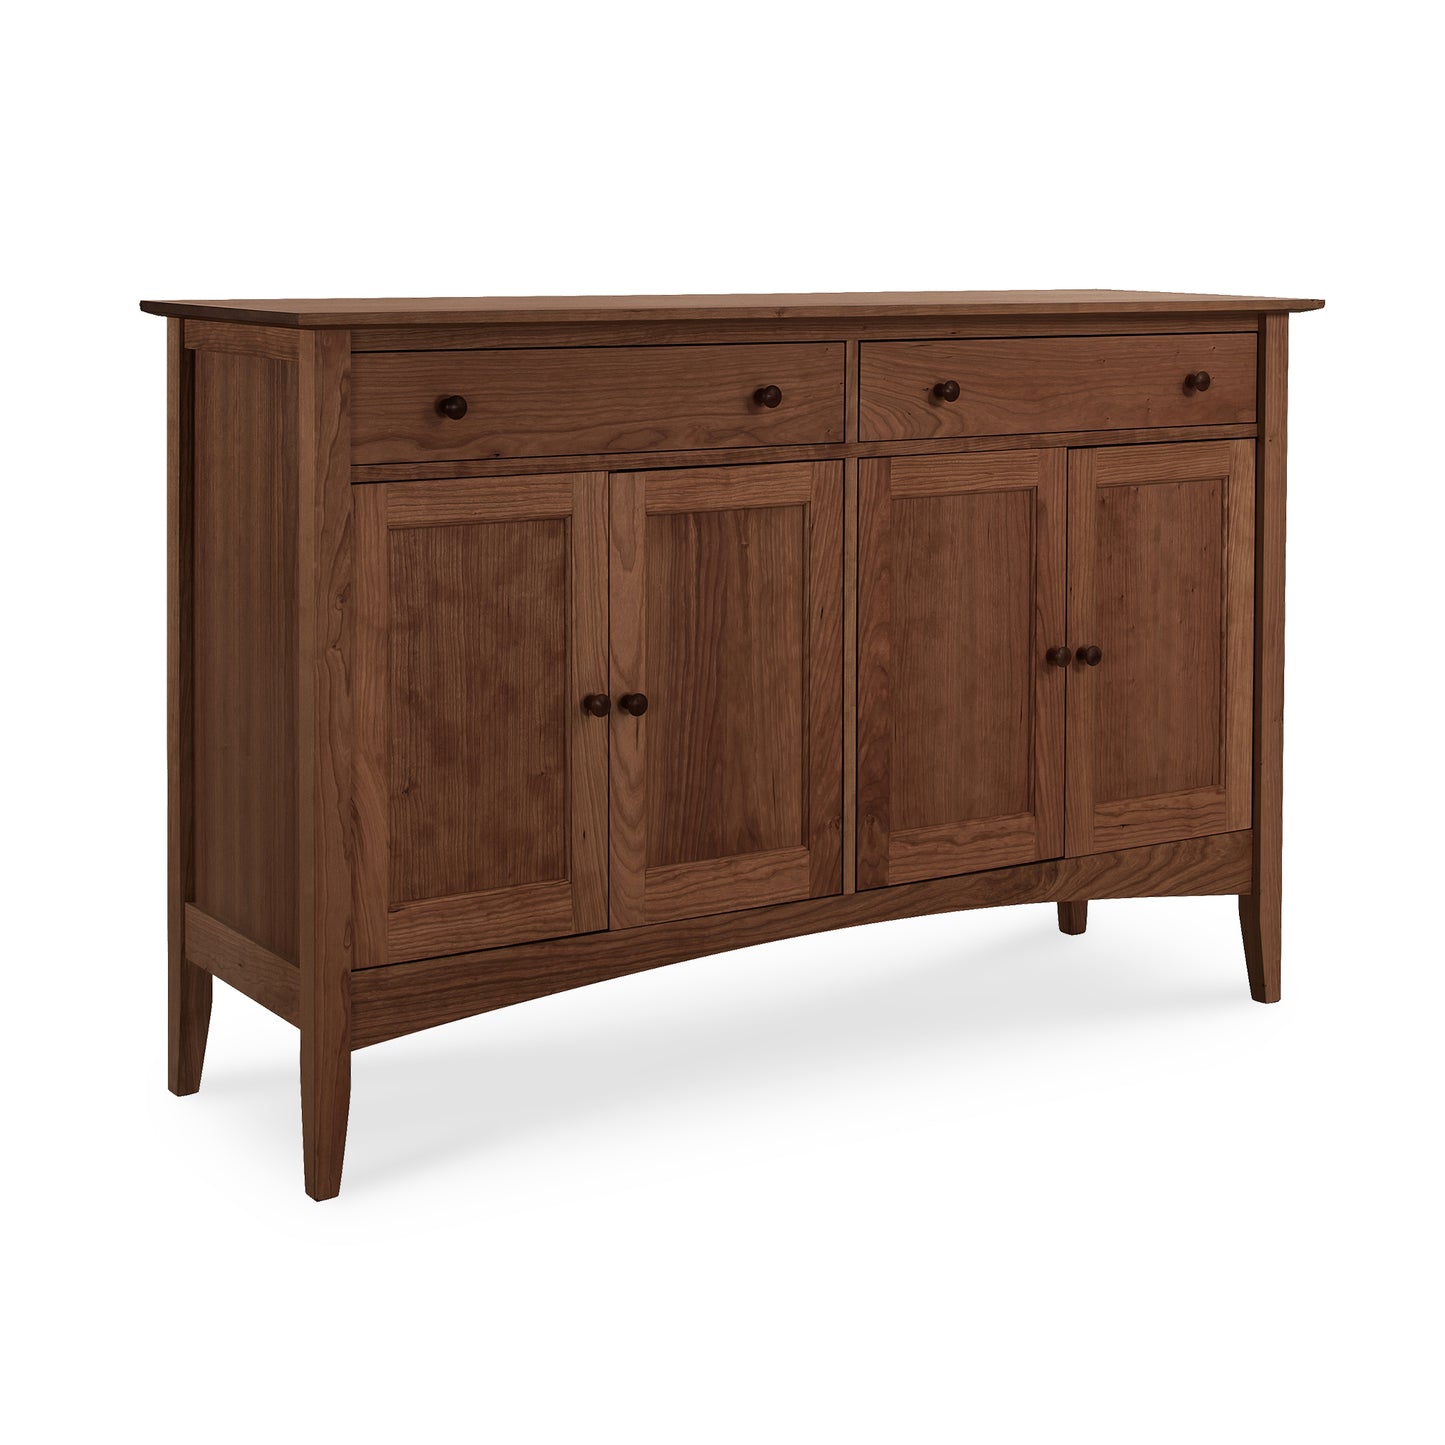 A solid hardwood construction Maple Corner Woodworks American Shaker Large Sideboard with three drawers and three doors on a white background.